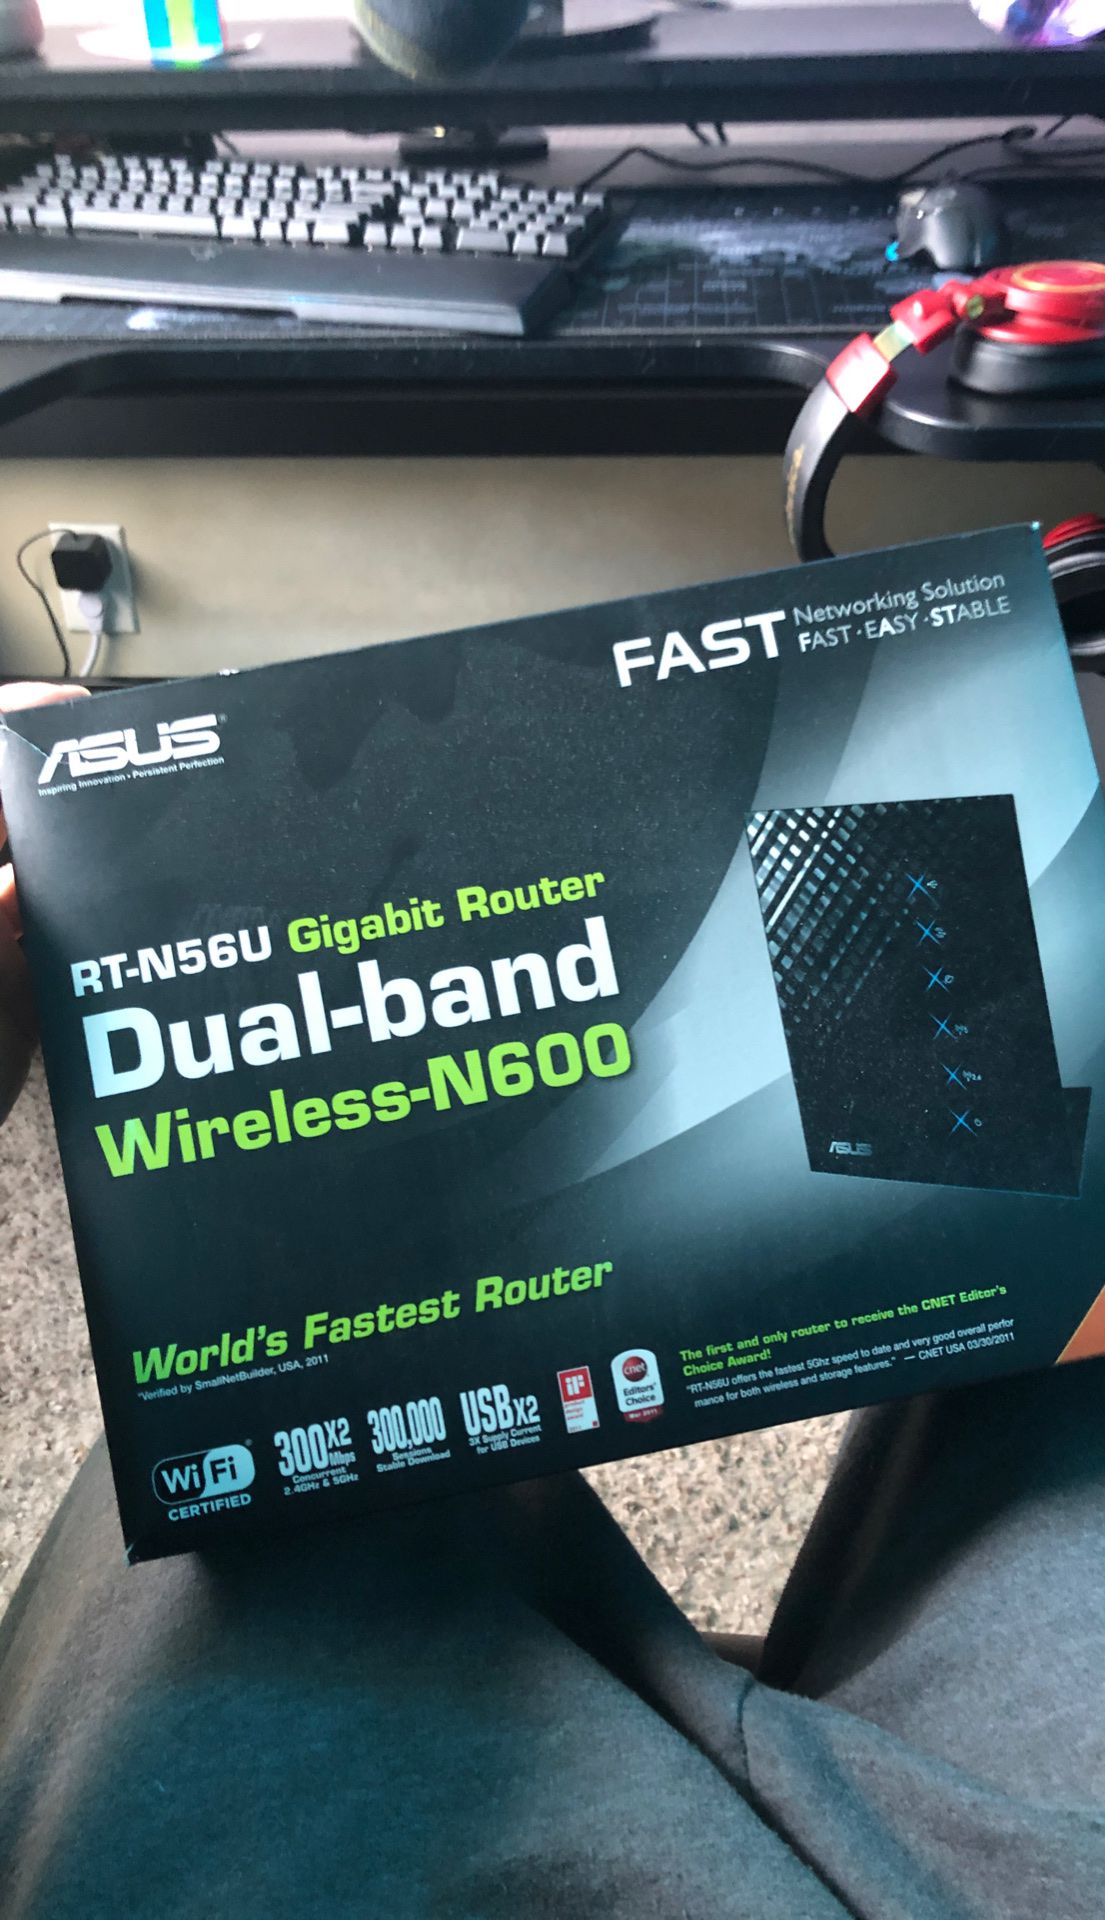 ASUS dual-band wireless-N600 Router